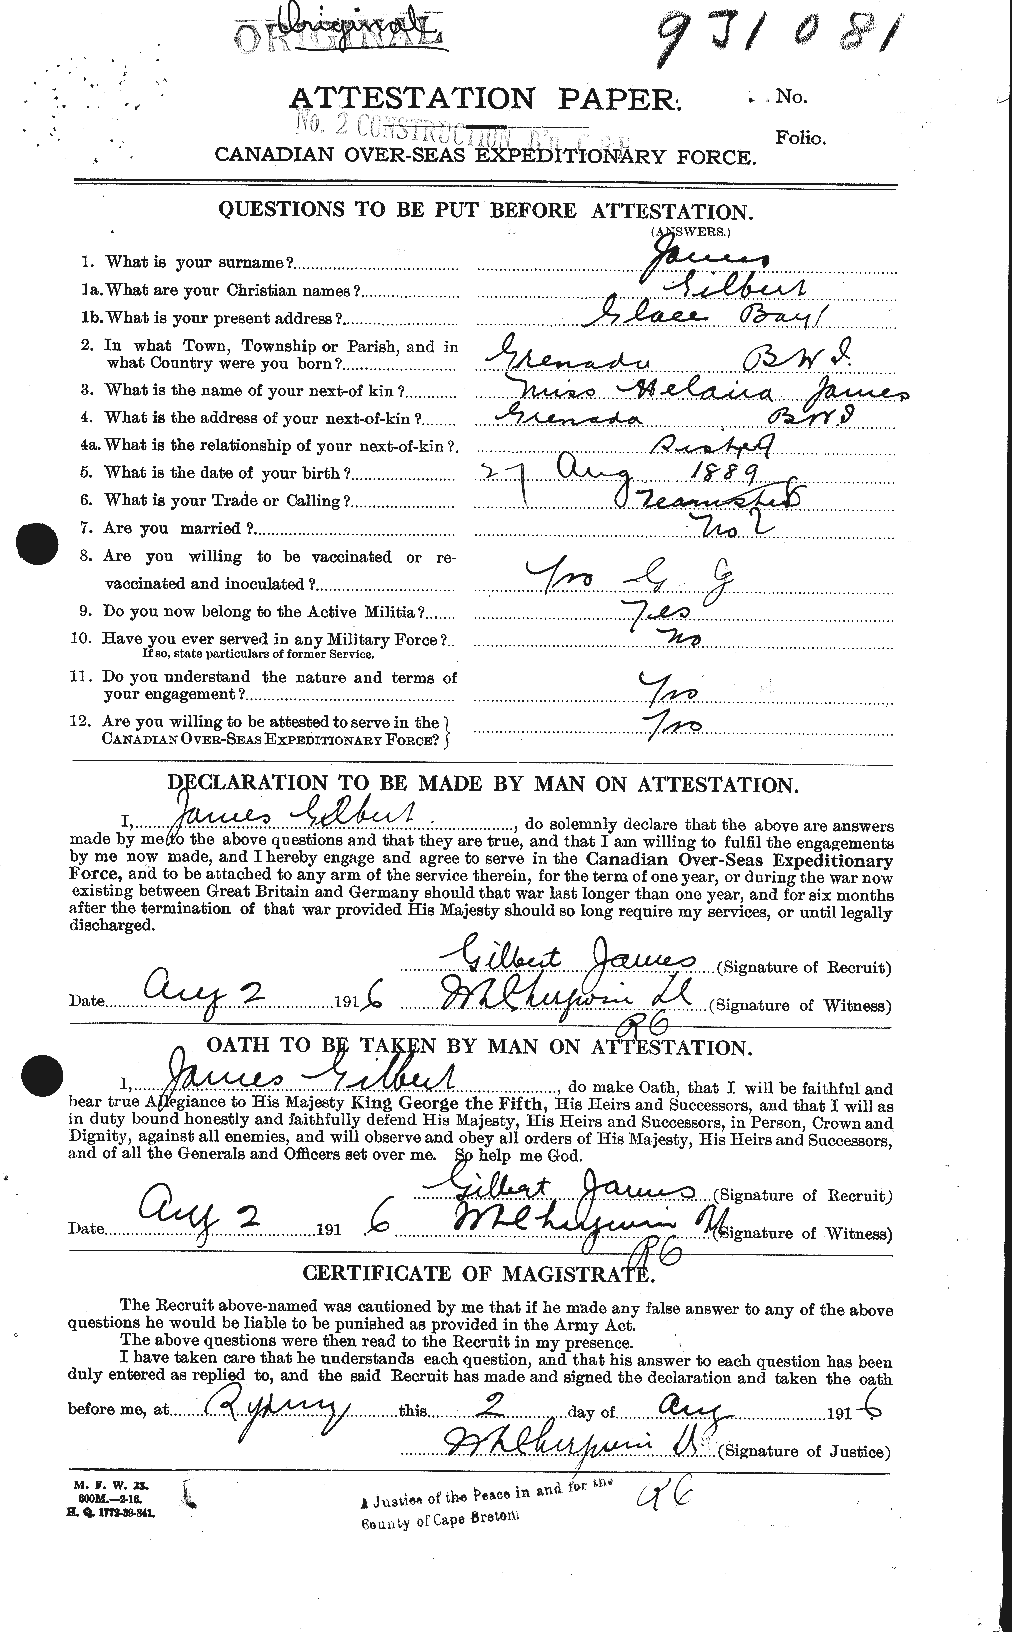 Personnel Records of the First World War - CEF 419410a